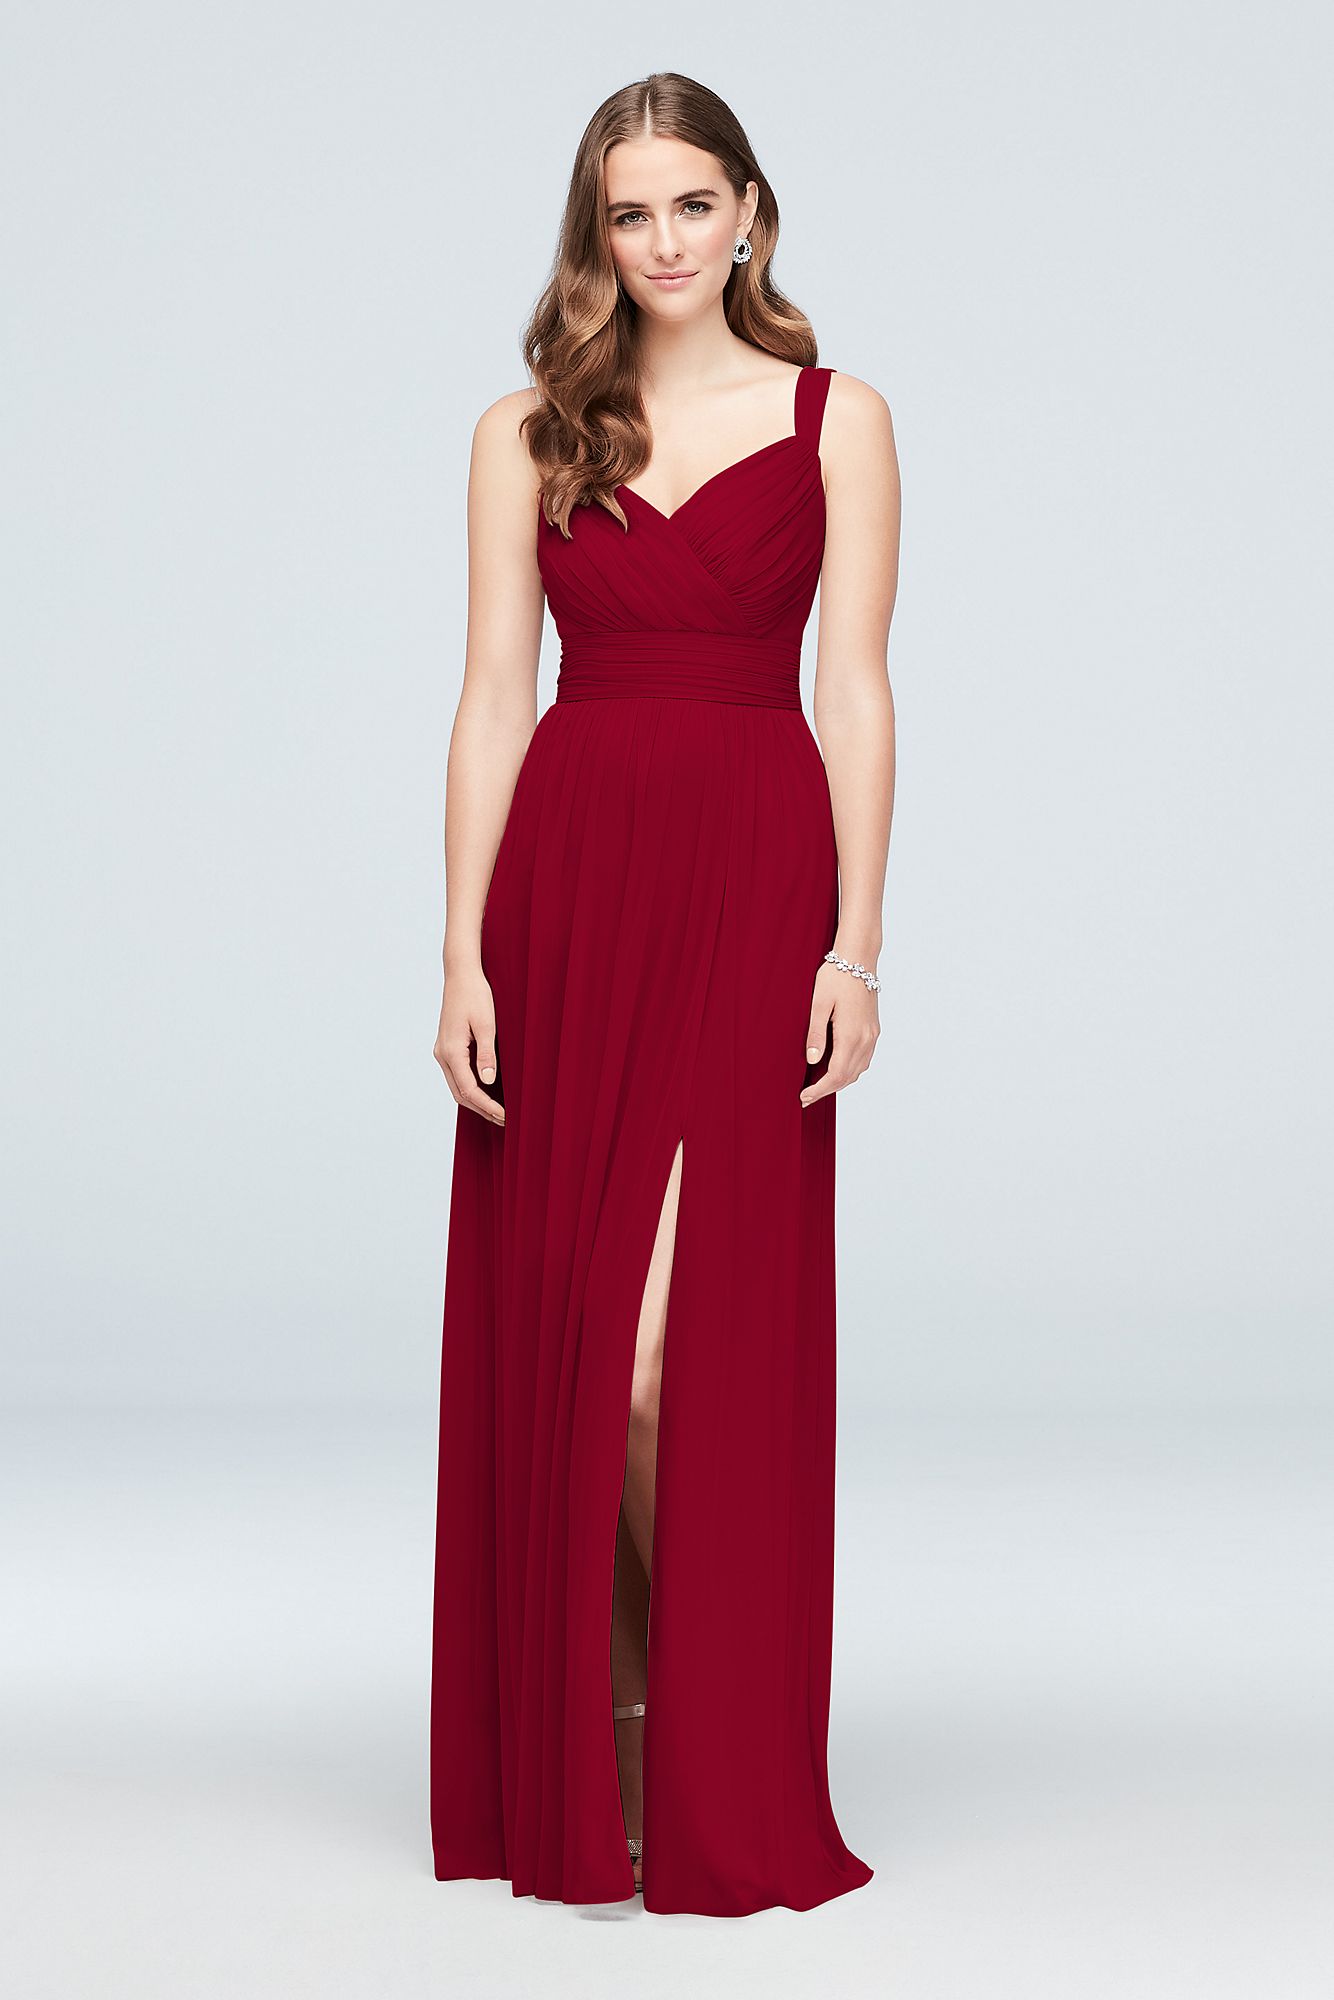 Sweetheart Strapless Stretch Crepe Dress